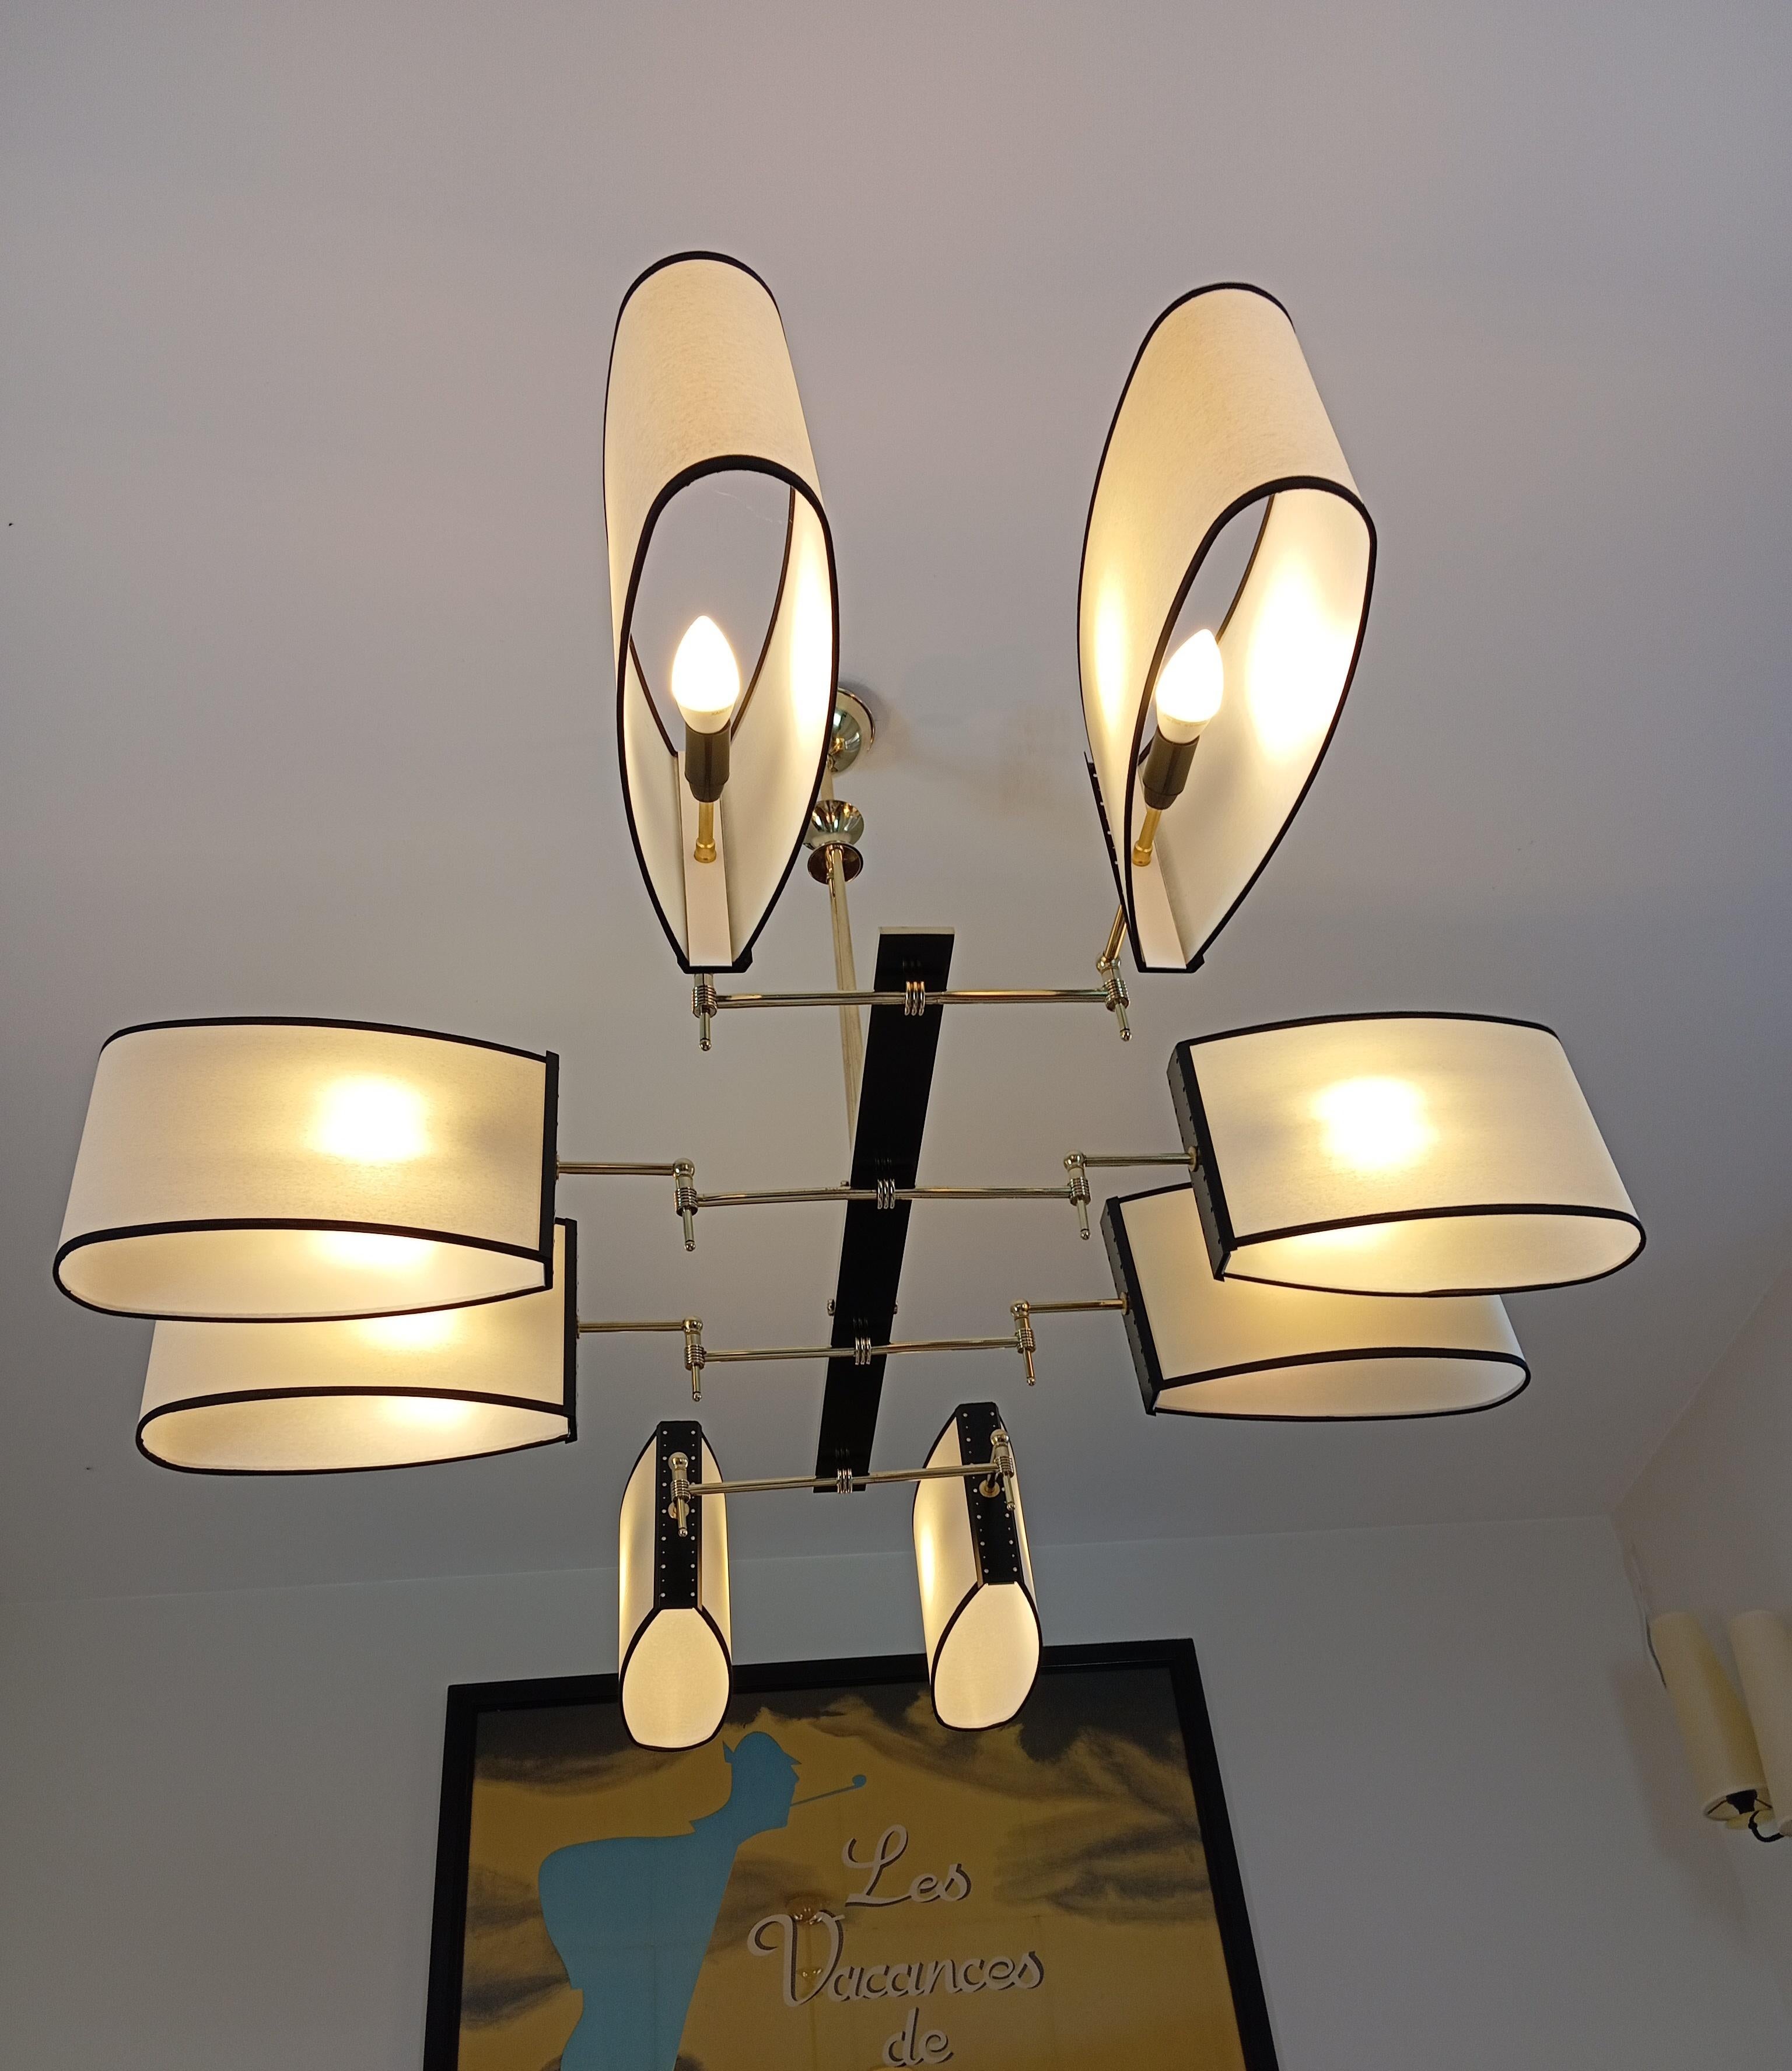 Brass chandelier, consisting of a rectangular, black-lacquered brass base; on which are fixed 8 brass light arms supporting oval shades.
This chandelier has been entirely restored, shades redone to model, new wiring to EU standards.
Possibility of